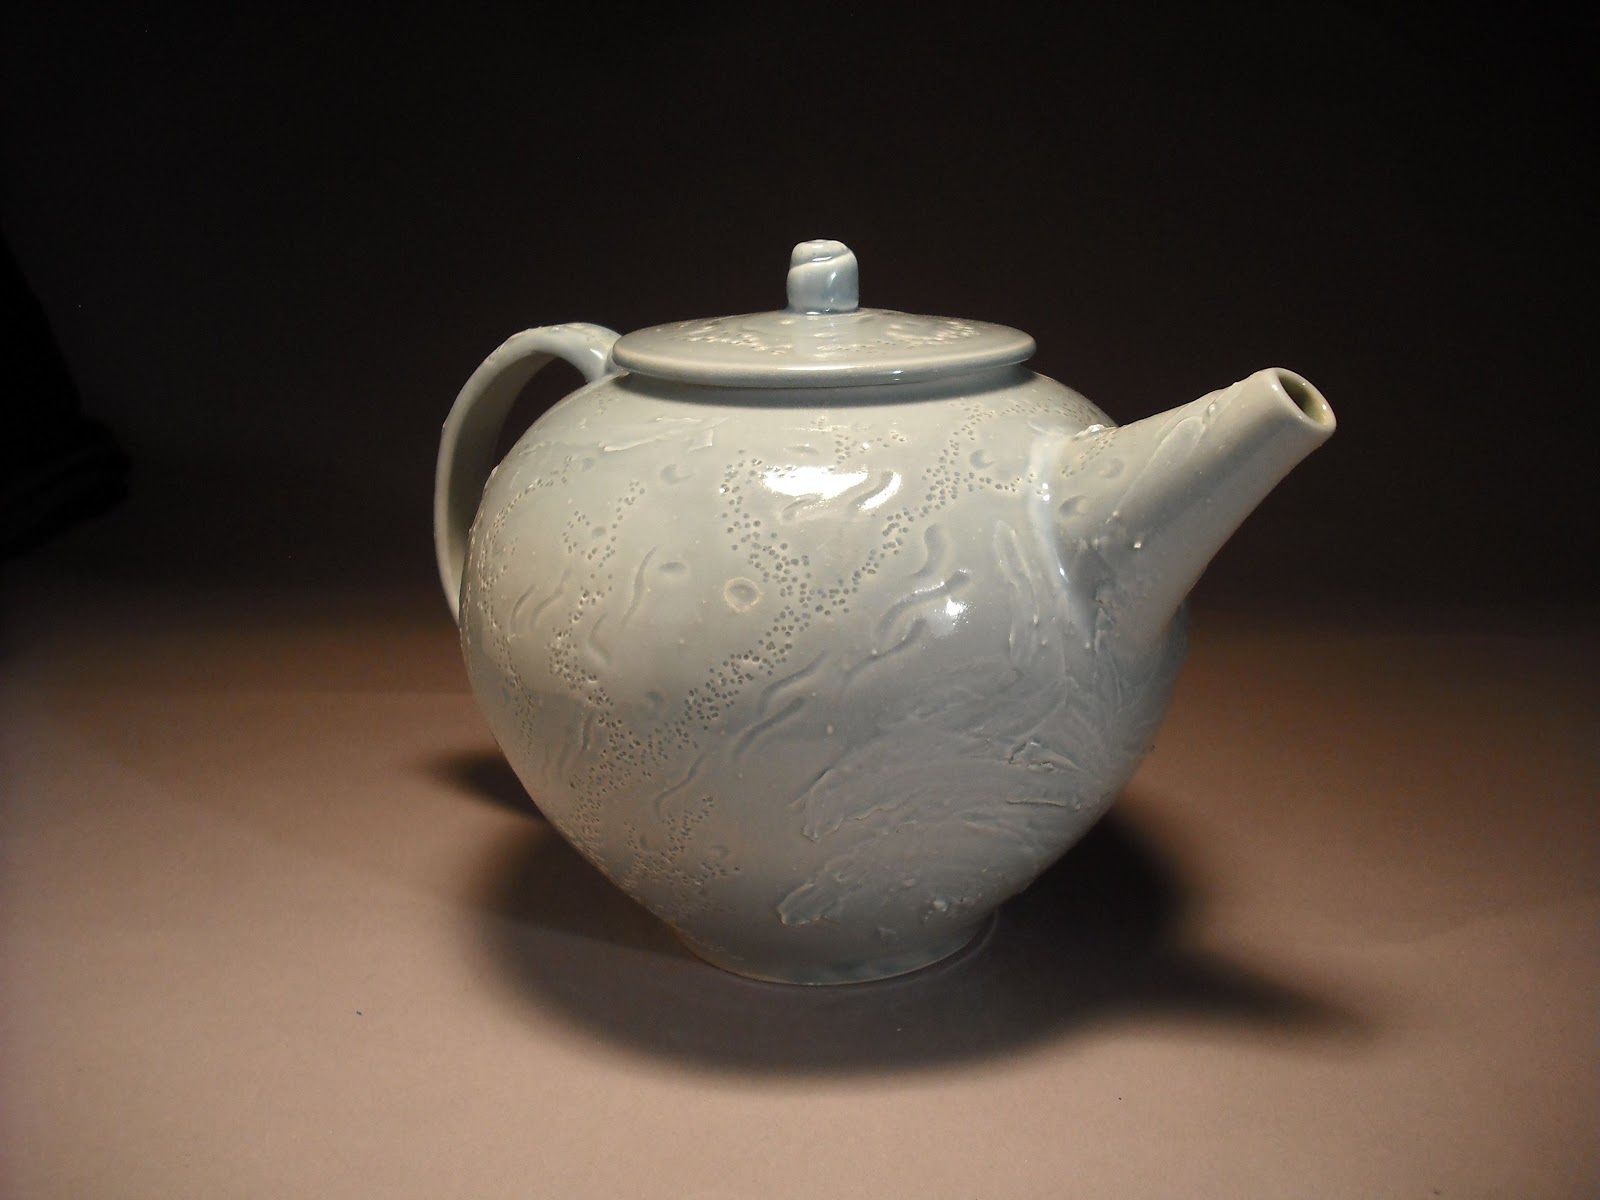 Beatrice Wood Center for the Arts: Teapots